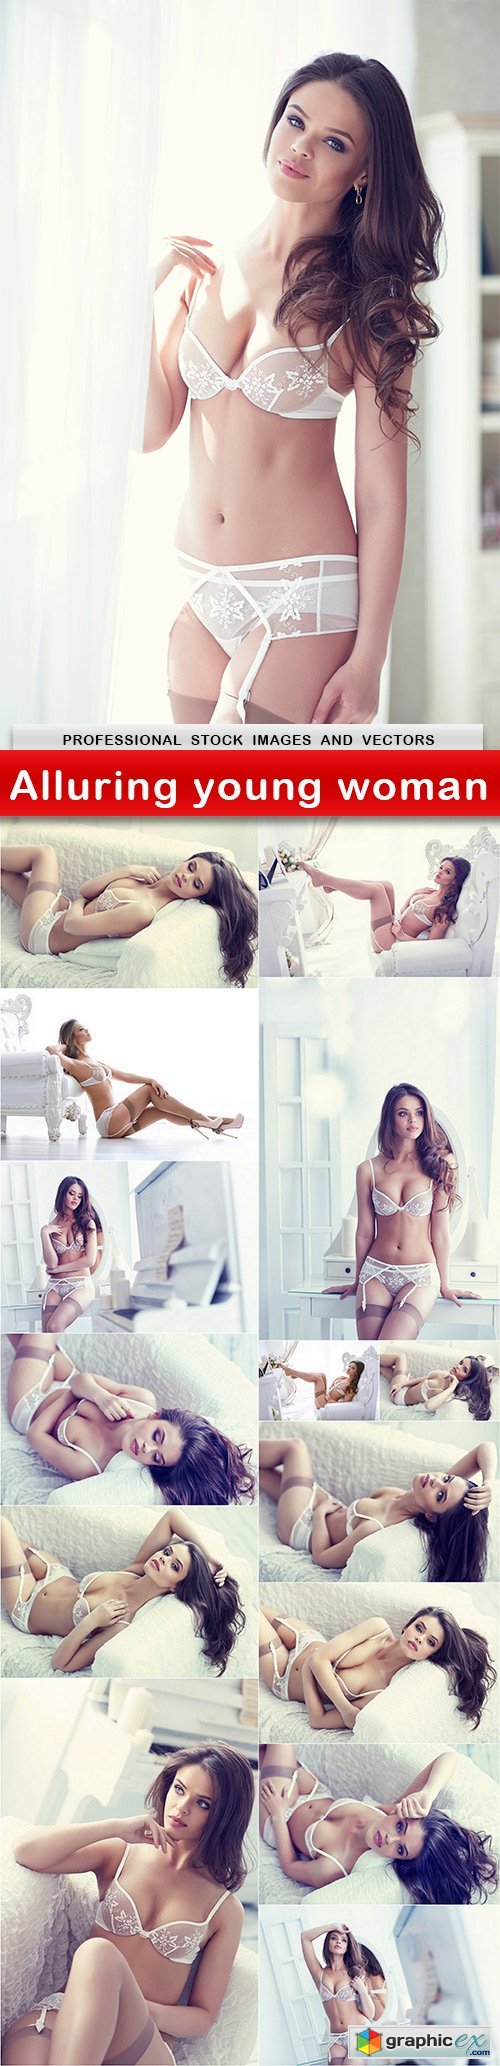 Alluring young woman - 15 UHQ JPEG